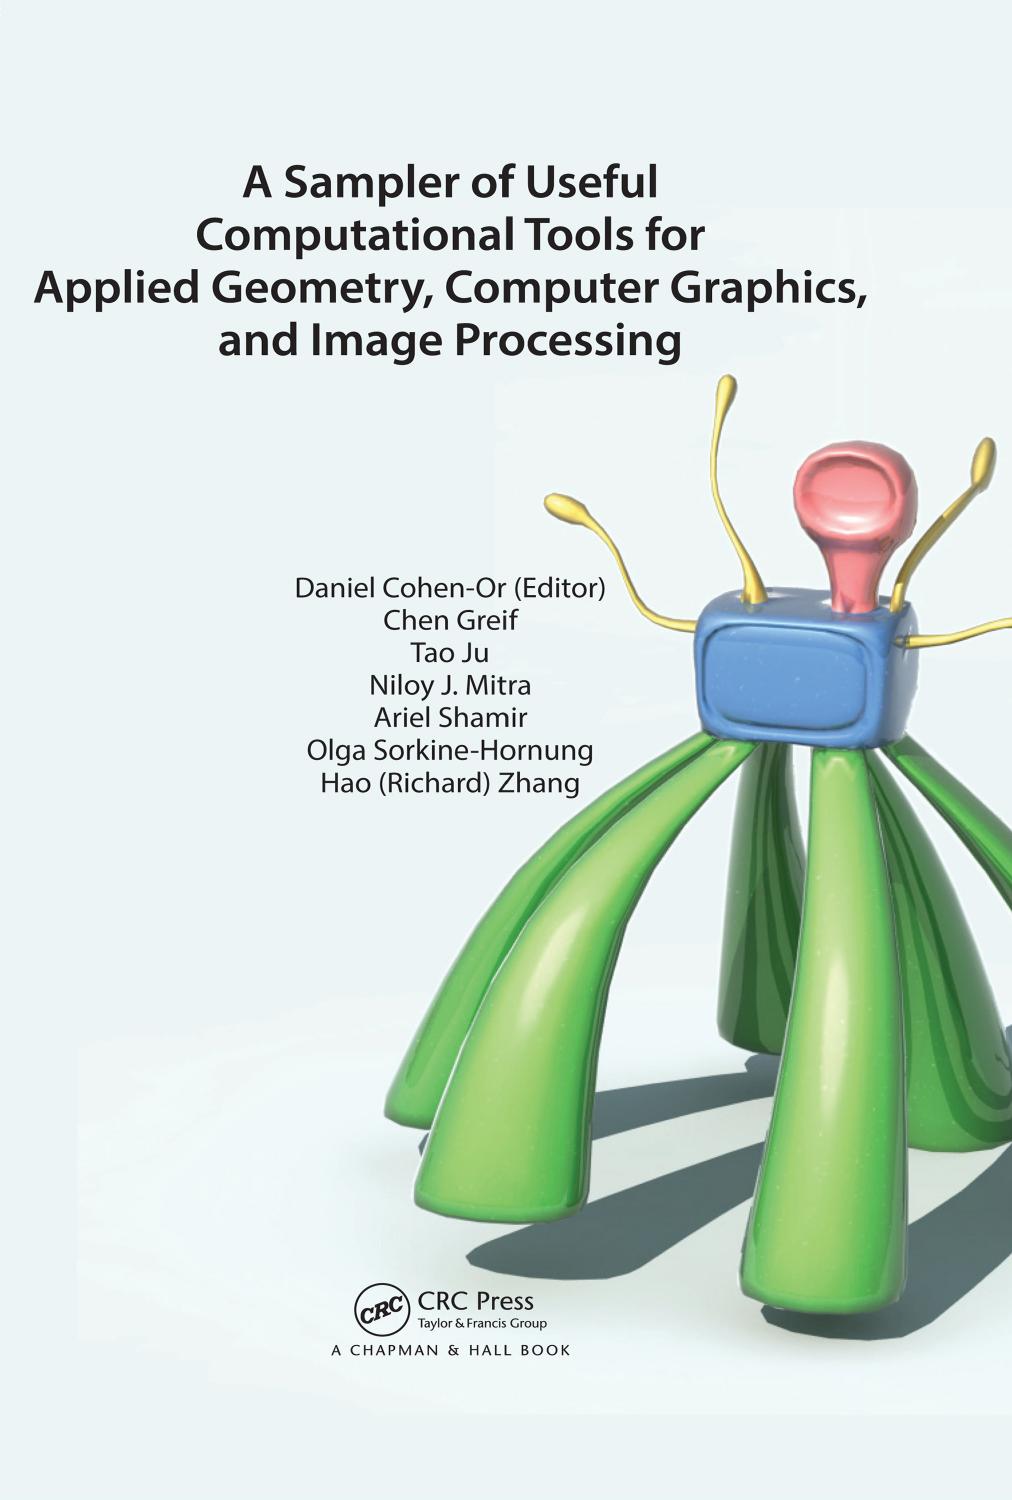 A Sampler of Useful Computational Tools for Applied Geometry, Computer Graphics, and Image Processing: Foundations for Computer Graphics, Vision, and Image Processing